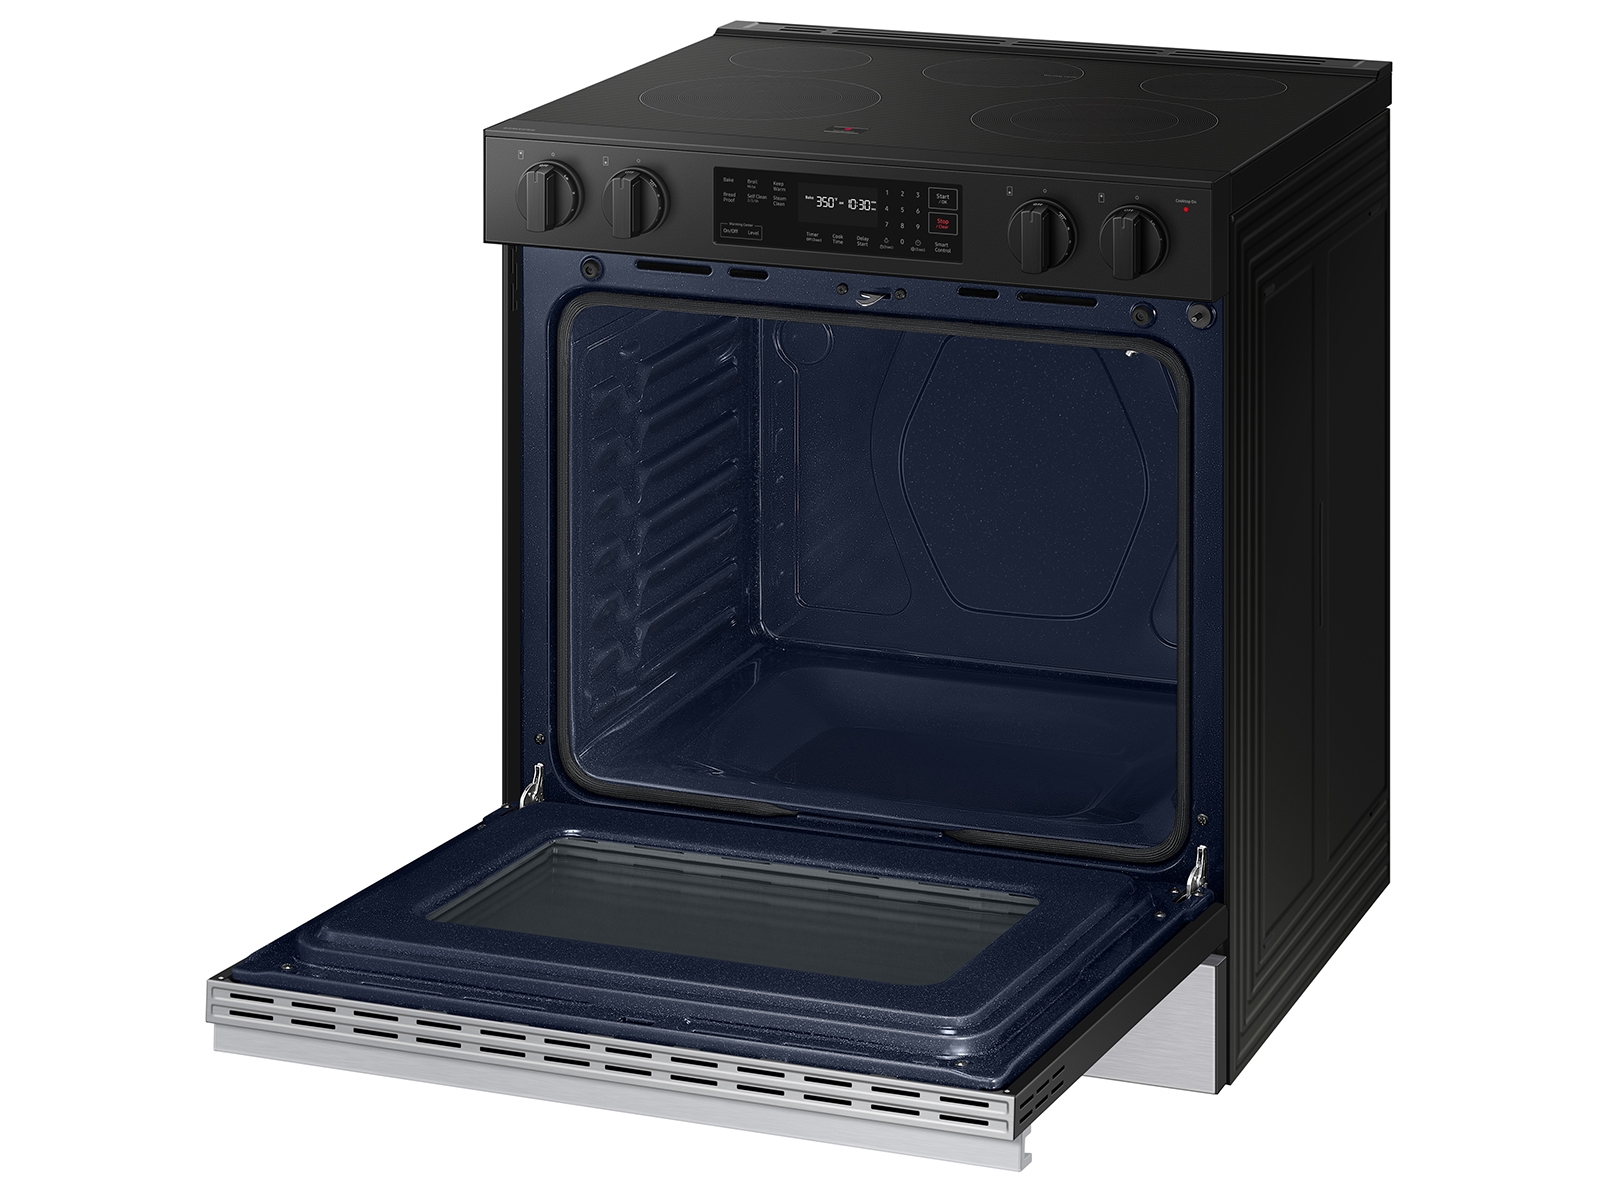 Thumbnail image of Bespoke 6.3 cu. ft. Smart Slide-In Electric Range with Precision Knobs in Stainless Steel